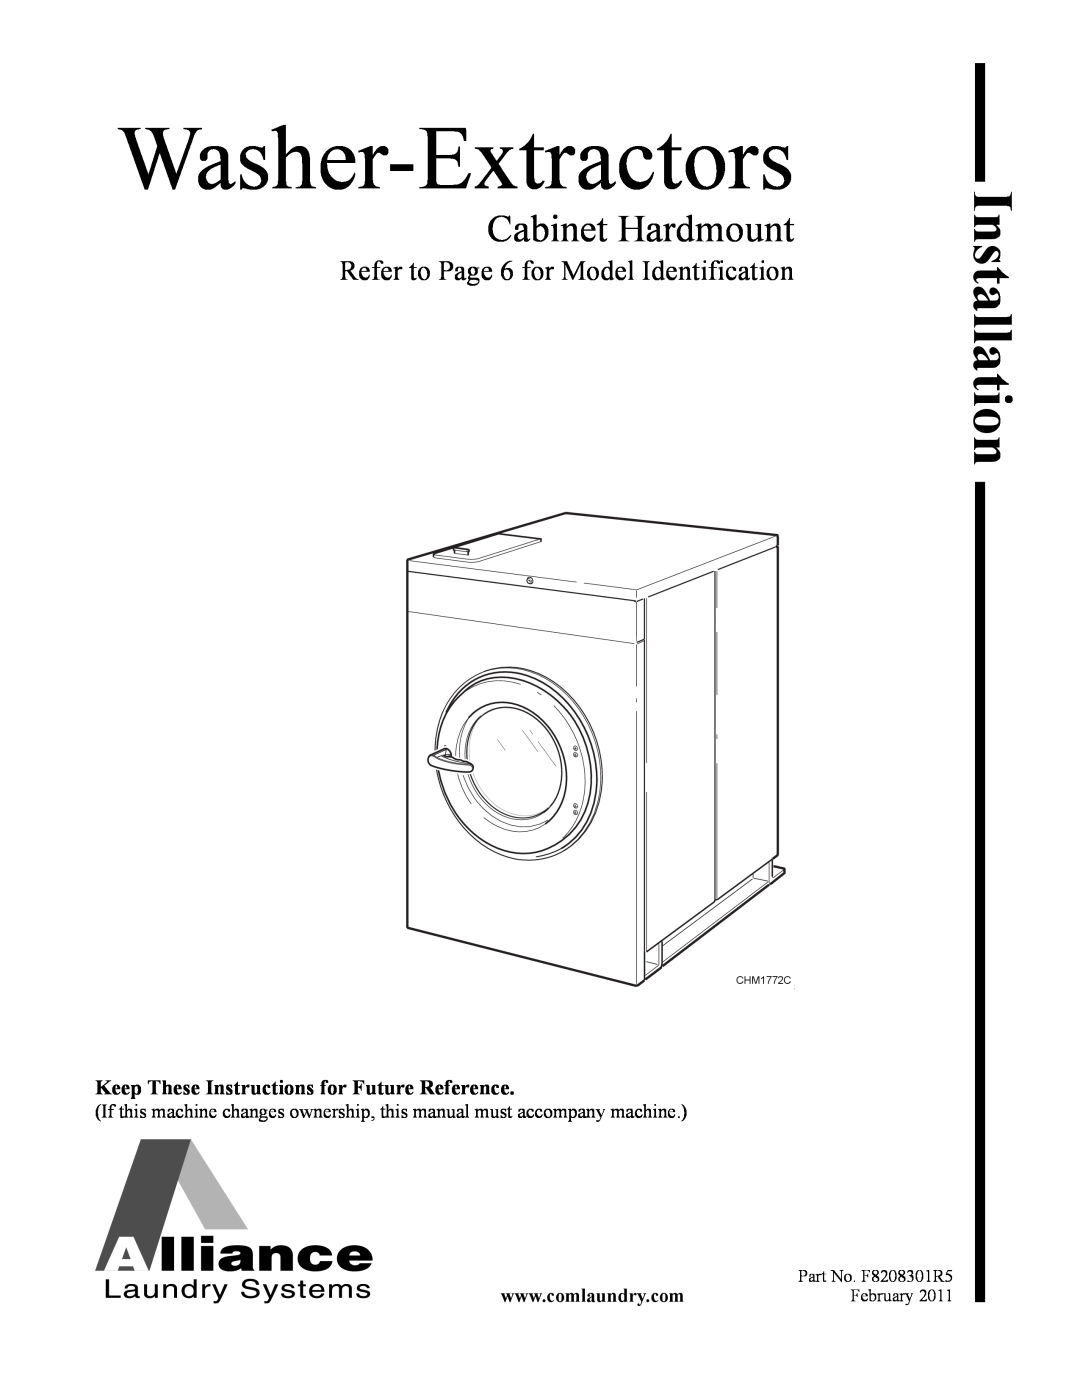 Alliance Laundry Systems CHM1772C manual Washer-Extractors, Installation, Cabinet Hardmount 